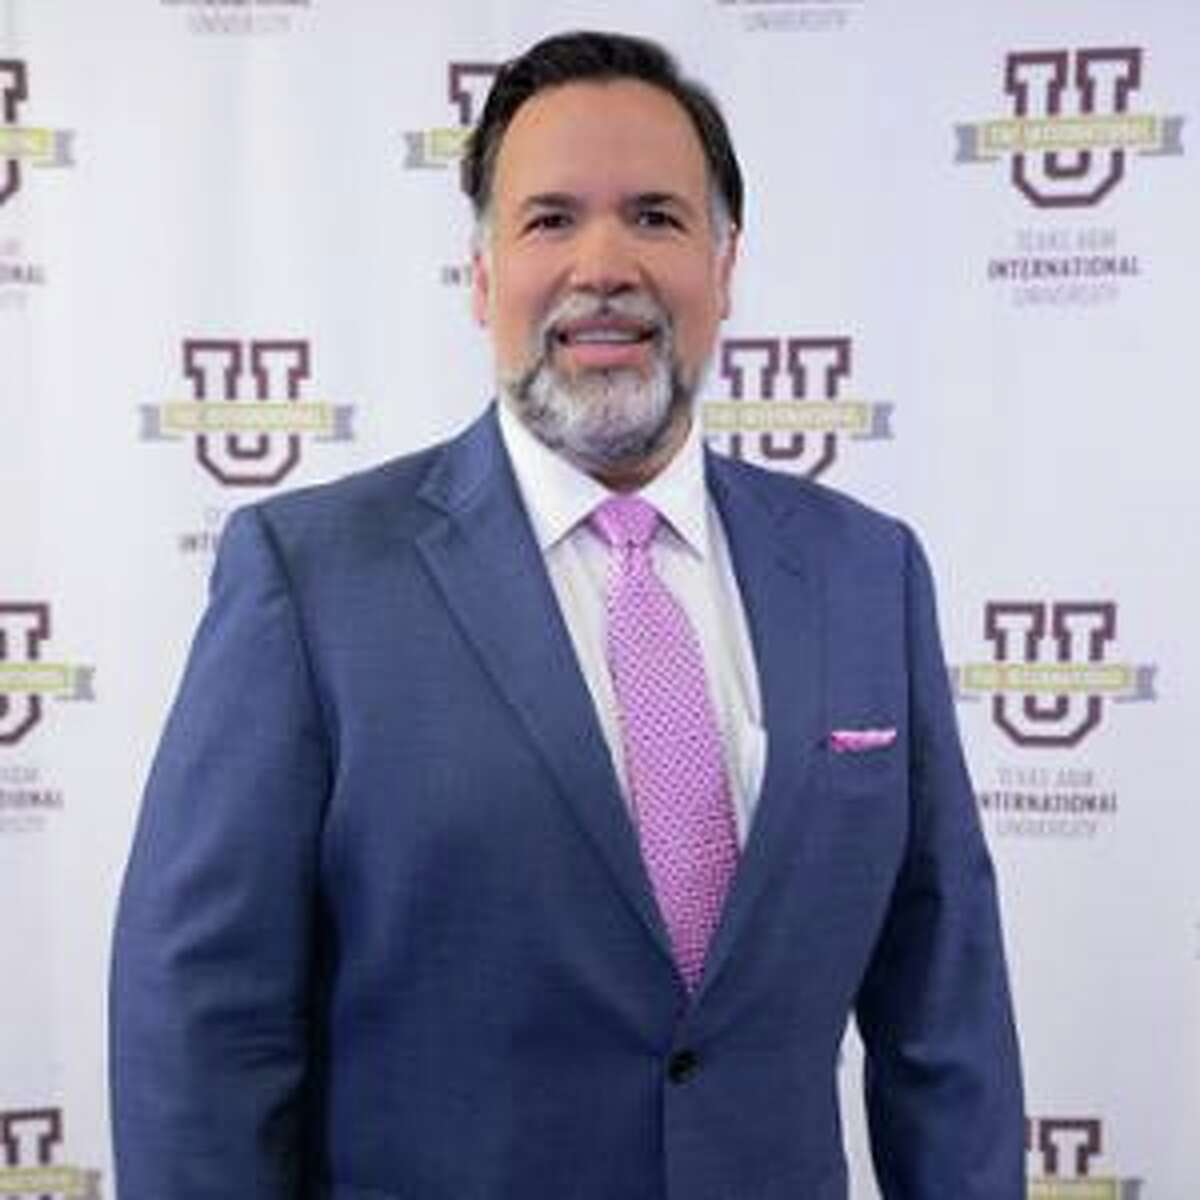 Dr. Covarrubias was appointed as Committee member by Juan Carlos Villa, Committee Chair and Texas A&M Transportation Institute regional manager for Latin America.